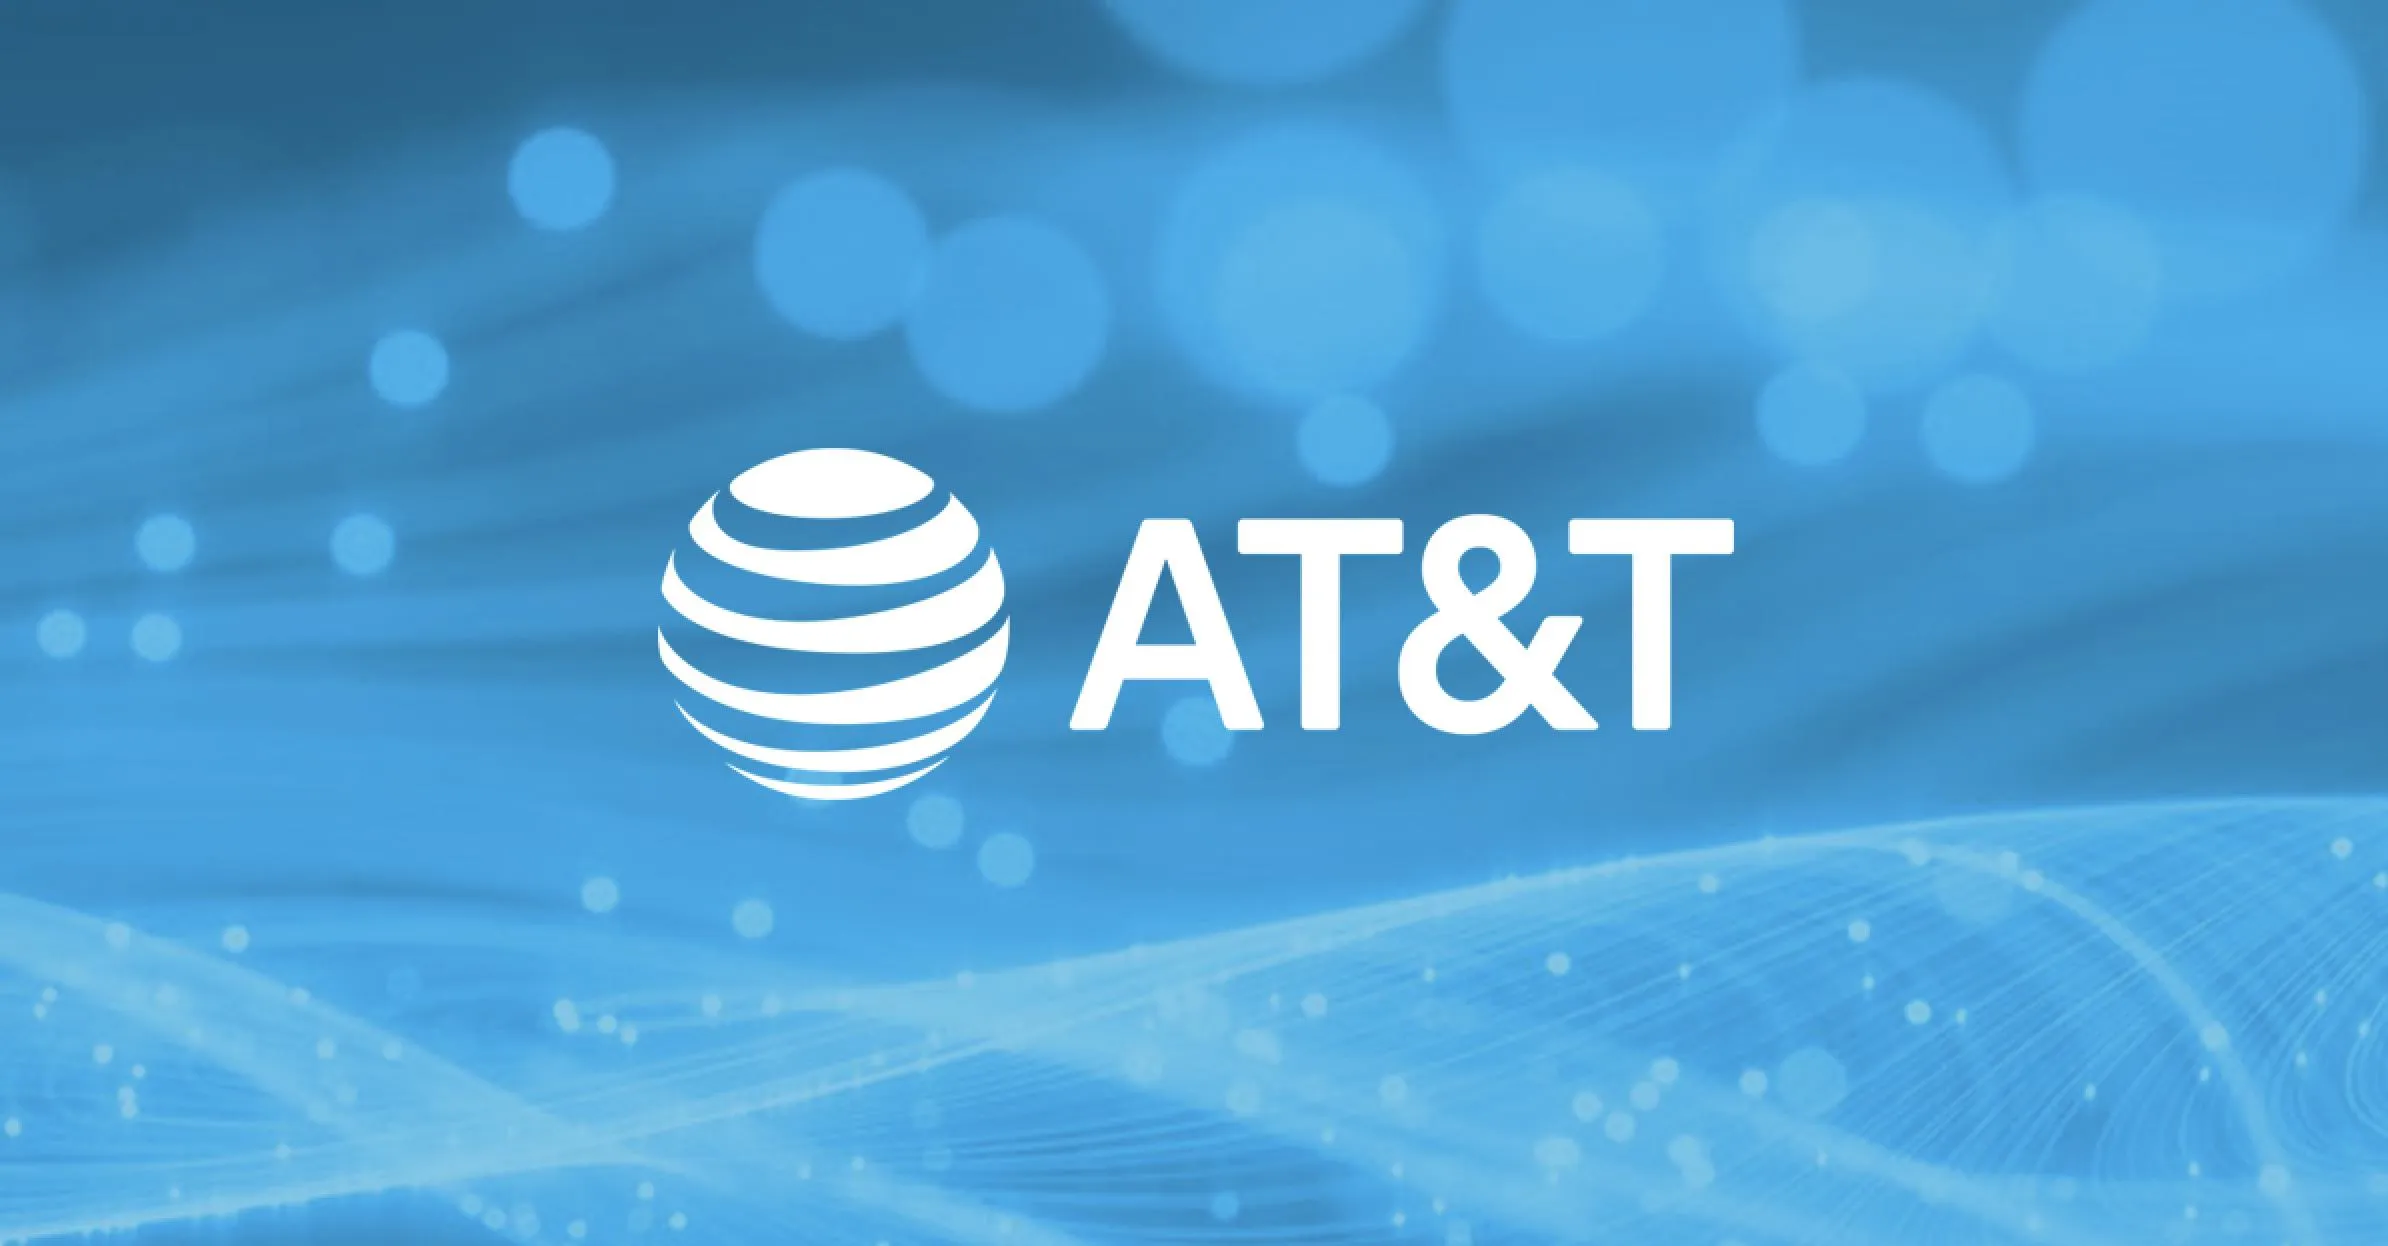 AT&T's failed carrier update disabled 125 million devices